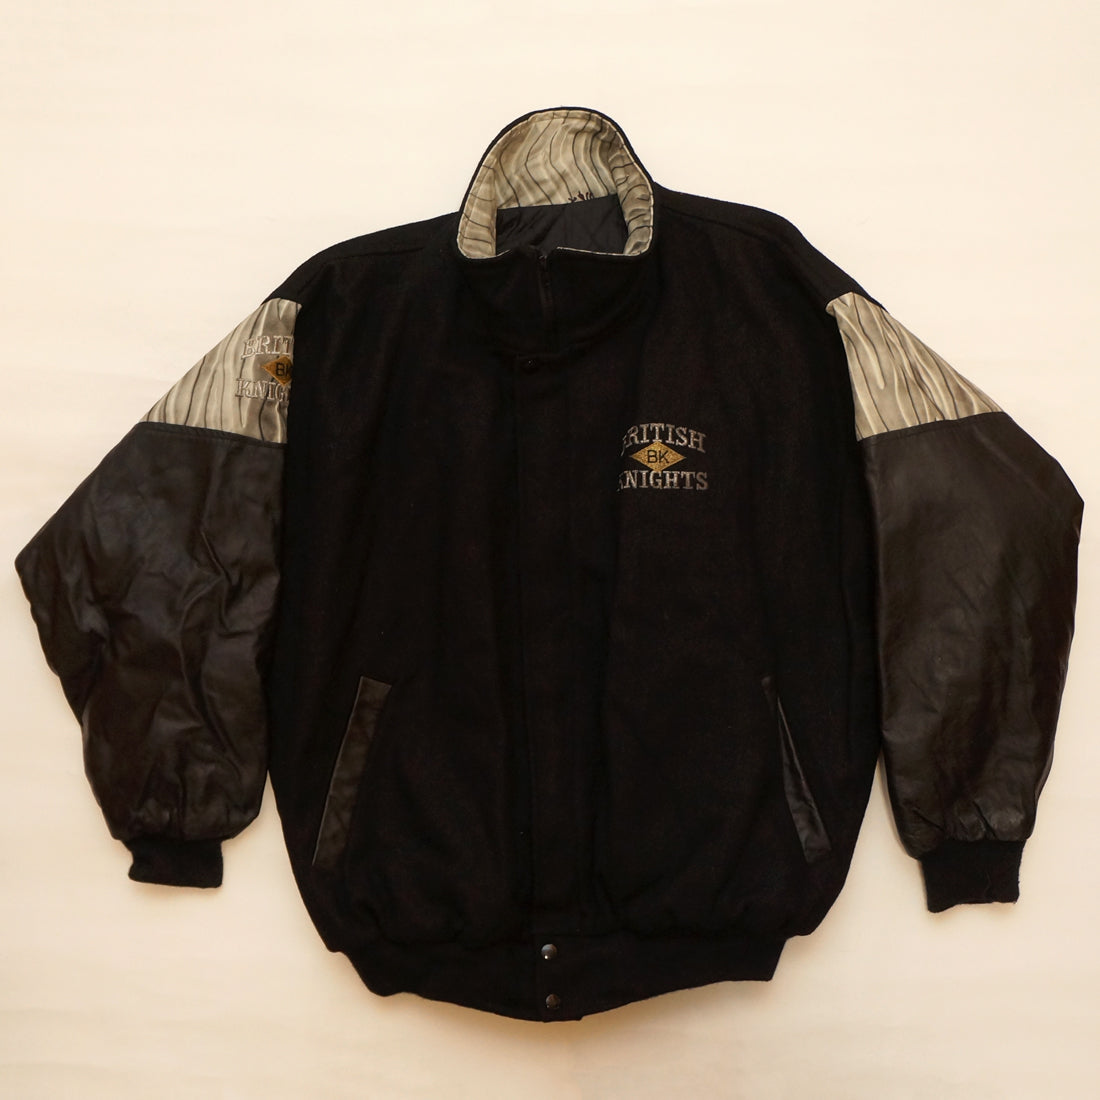 Vintage MC HAMMER "You Can't Touch This" Tour Jacket By British Knights